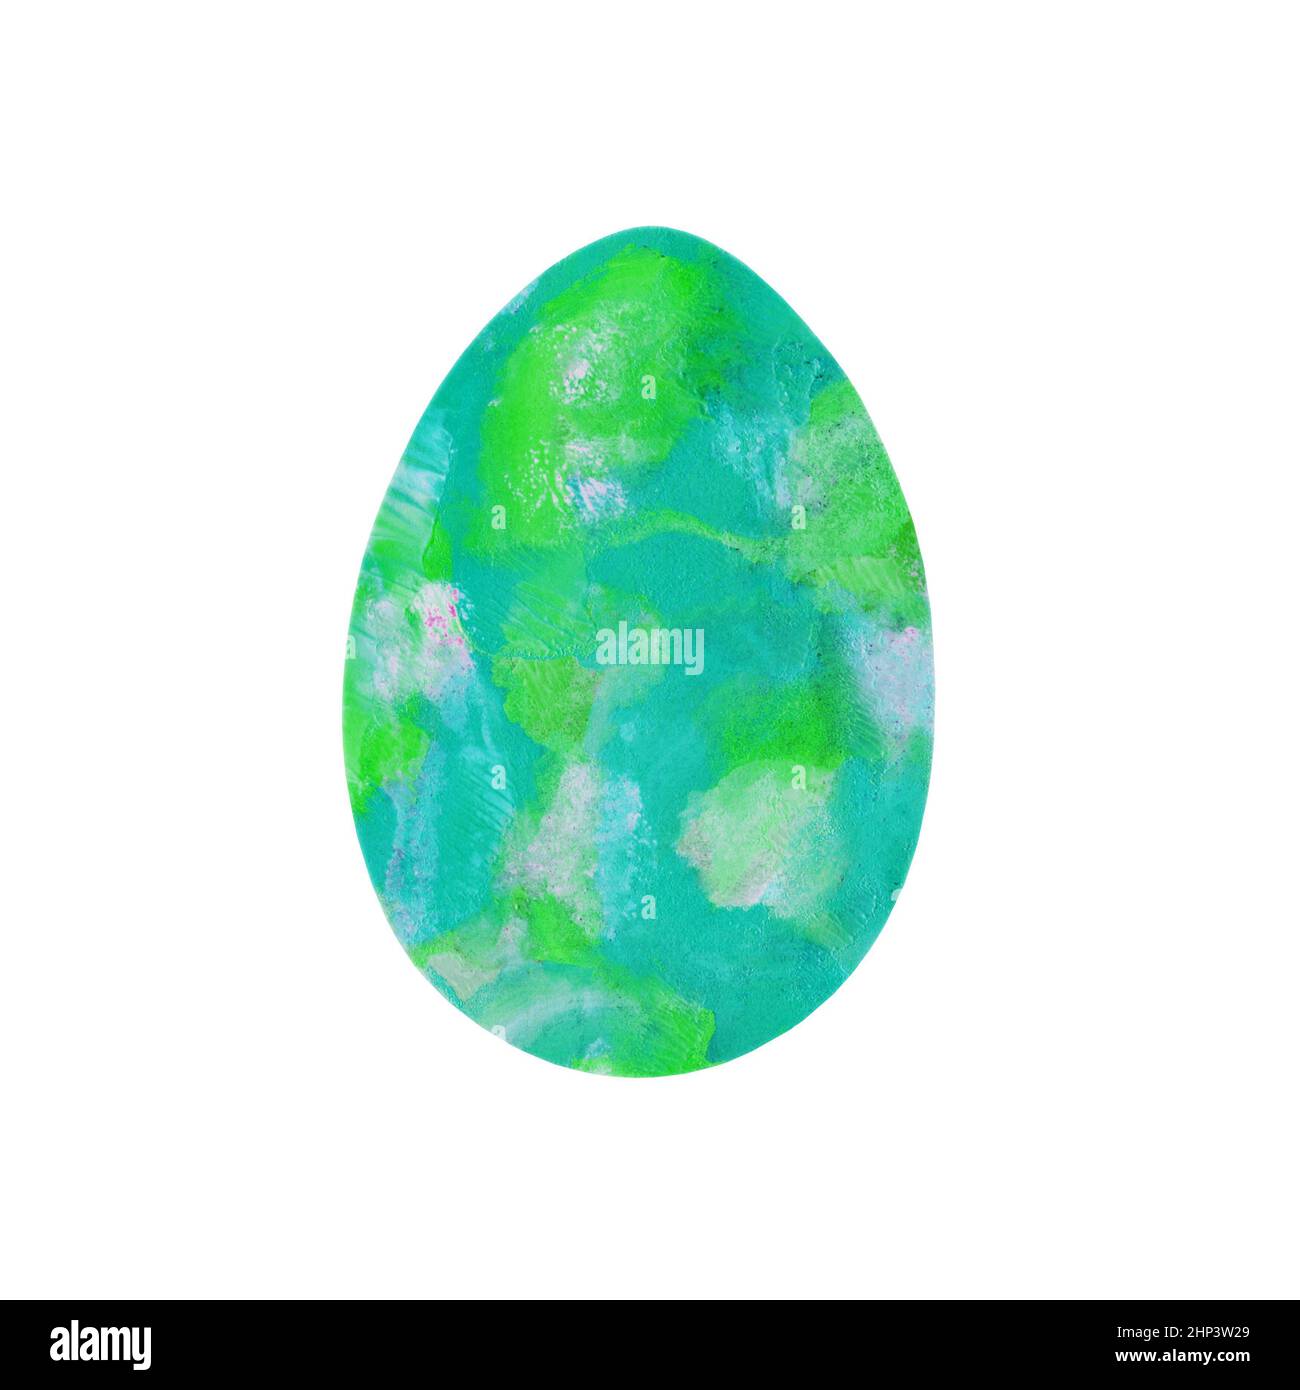 Easter egg - textured turquoise-green spots smears isolated on white background. Watercolor colorful textured painting. Design for background, cover and packaging, Easter and food illustration, greeting card. Stock Photo